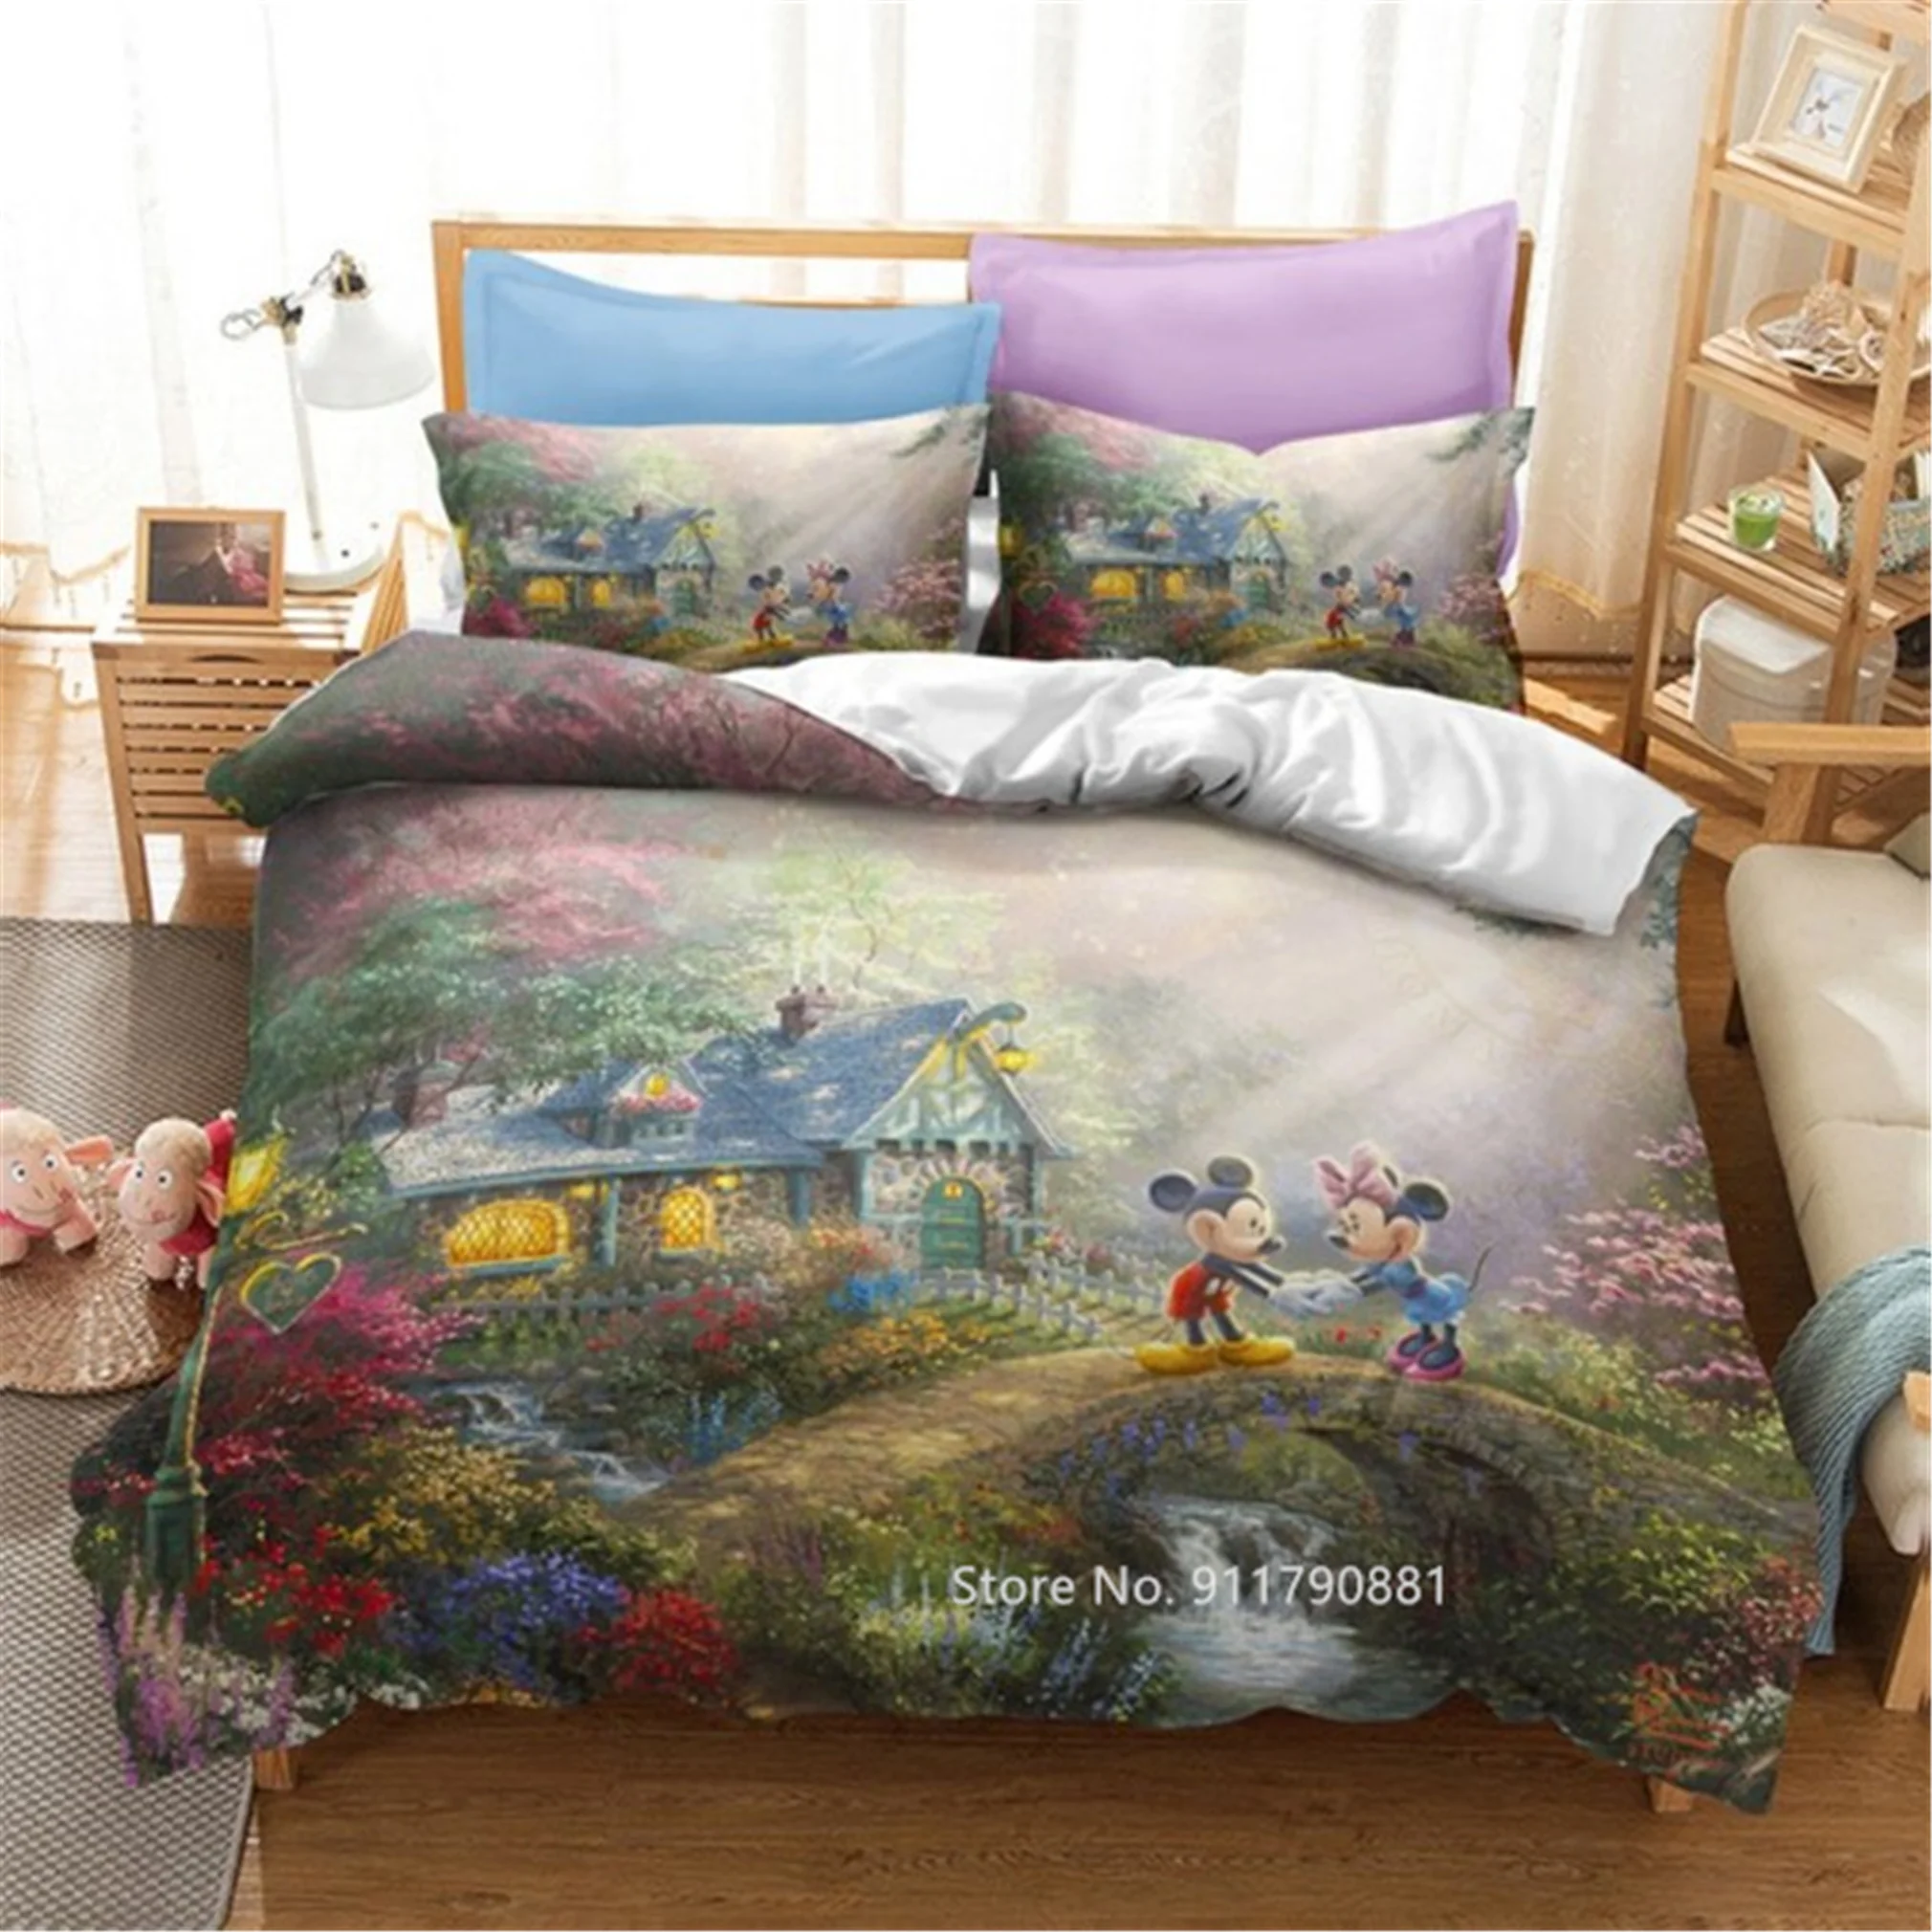 

Disney Animated Character Bedding Set Cute Comfortable Duvet Bed Cover Pillowcase Children Bedroom Decoration Home Textile